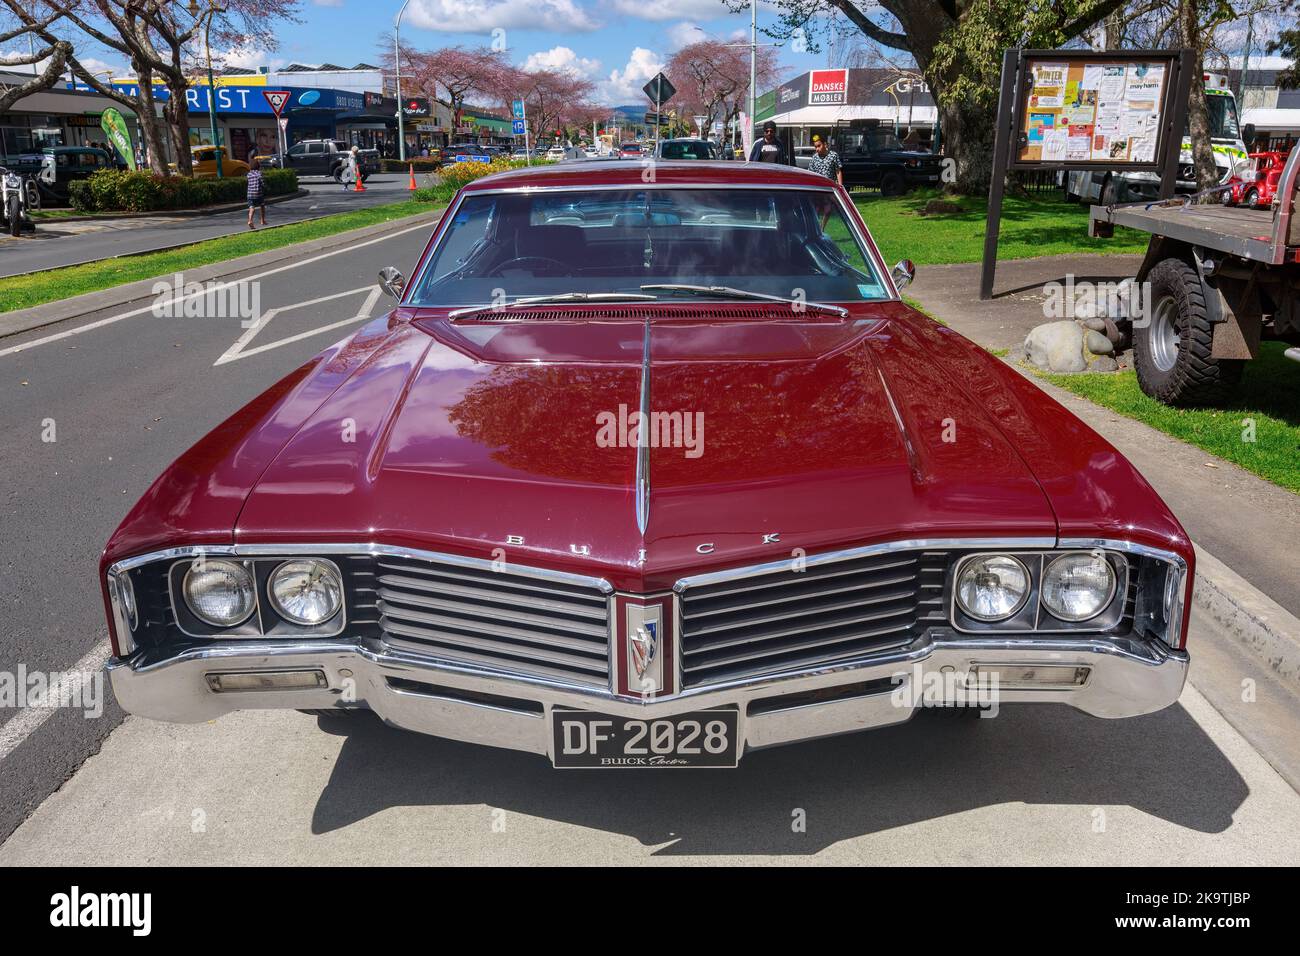 Front view of a 1967 Buick Electra, on display at a classic car show. Tauranga, New Zealand Stock Photo